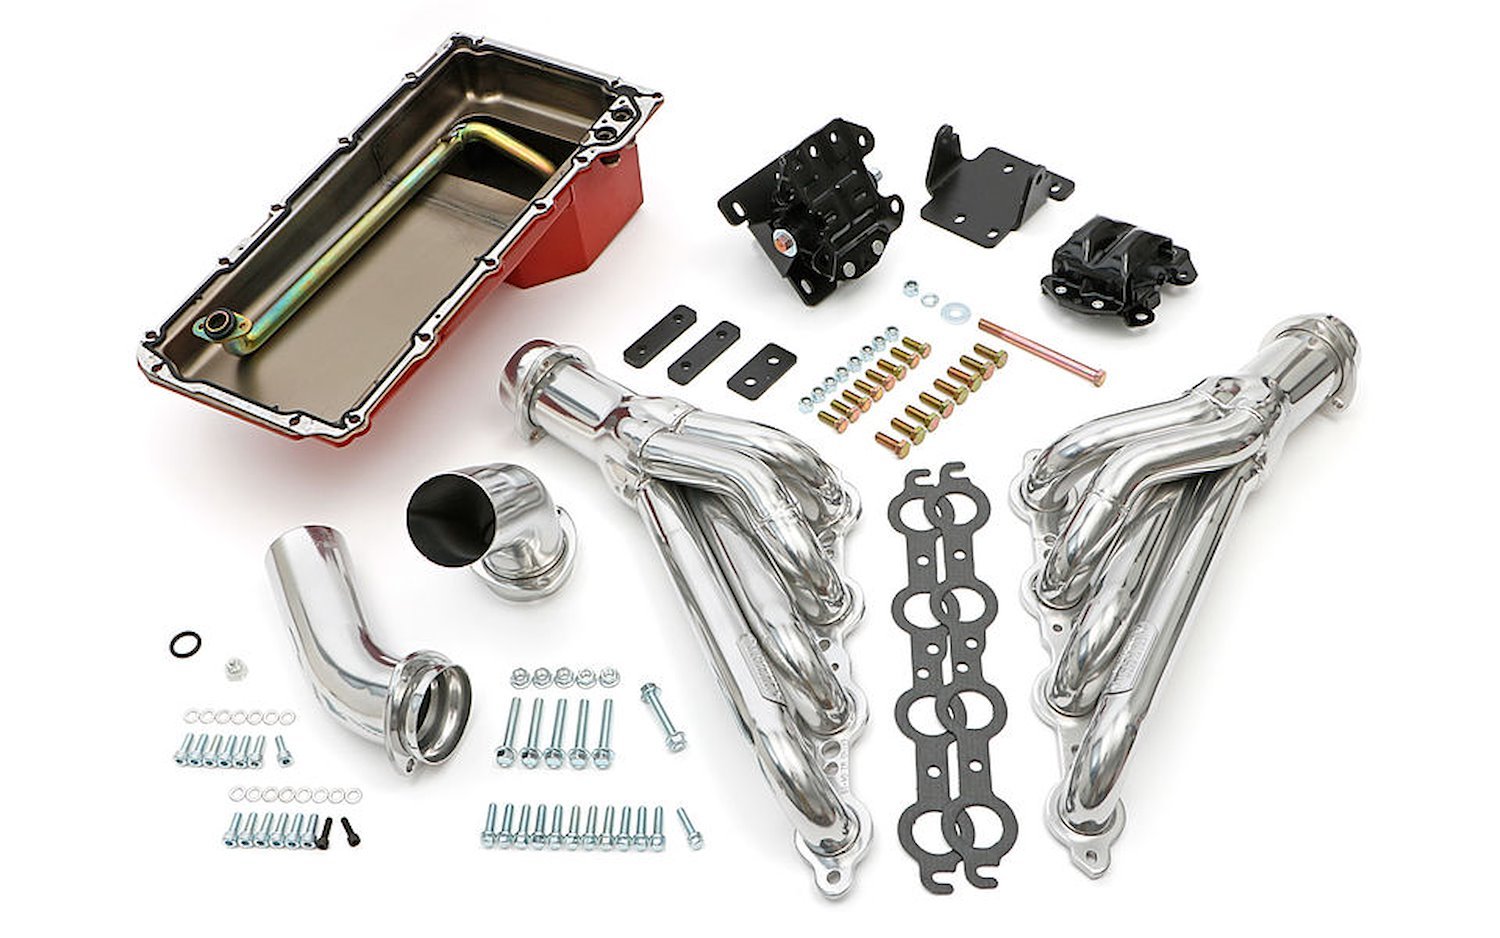 Swap in a Box Kit Swap LS Engine into 1968-1972 GM A-Body